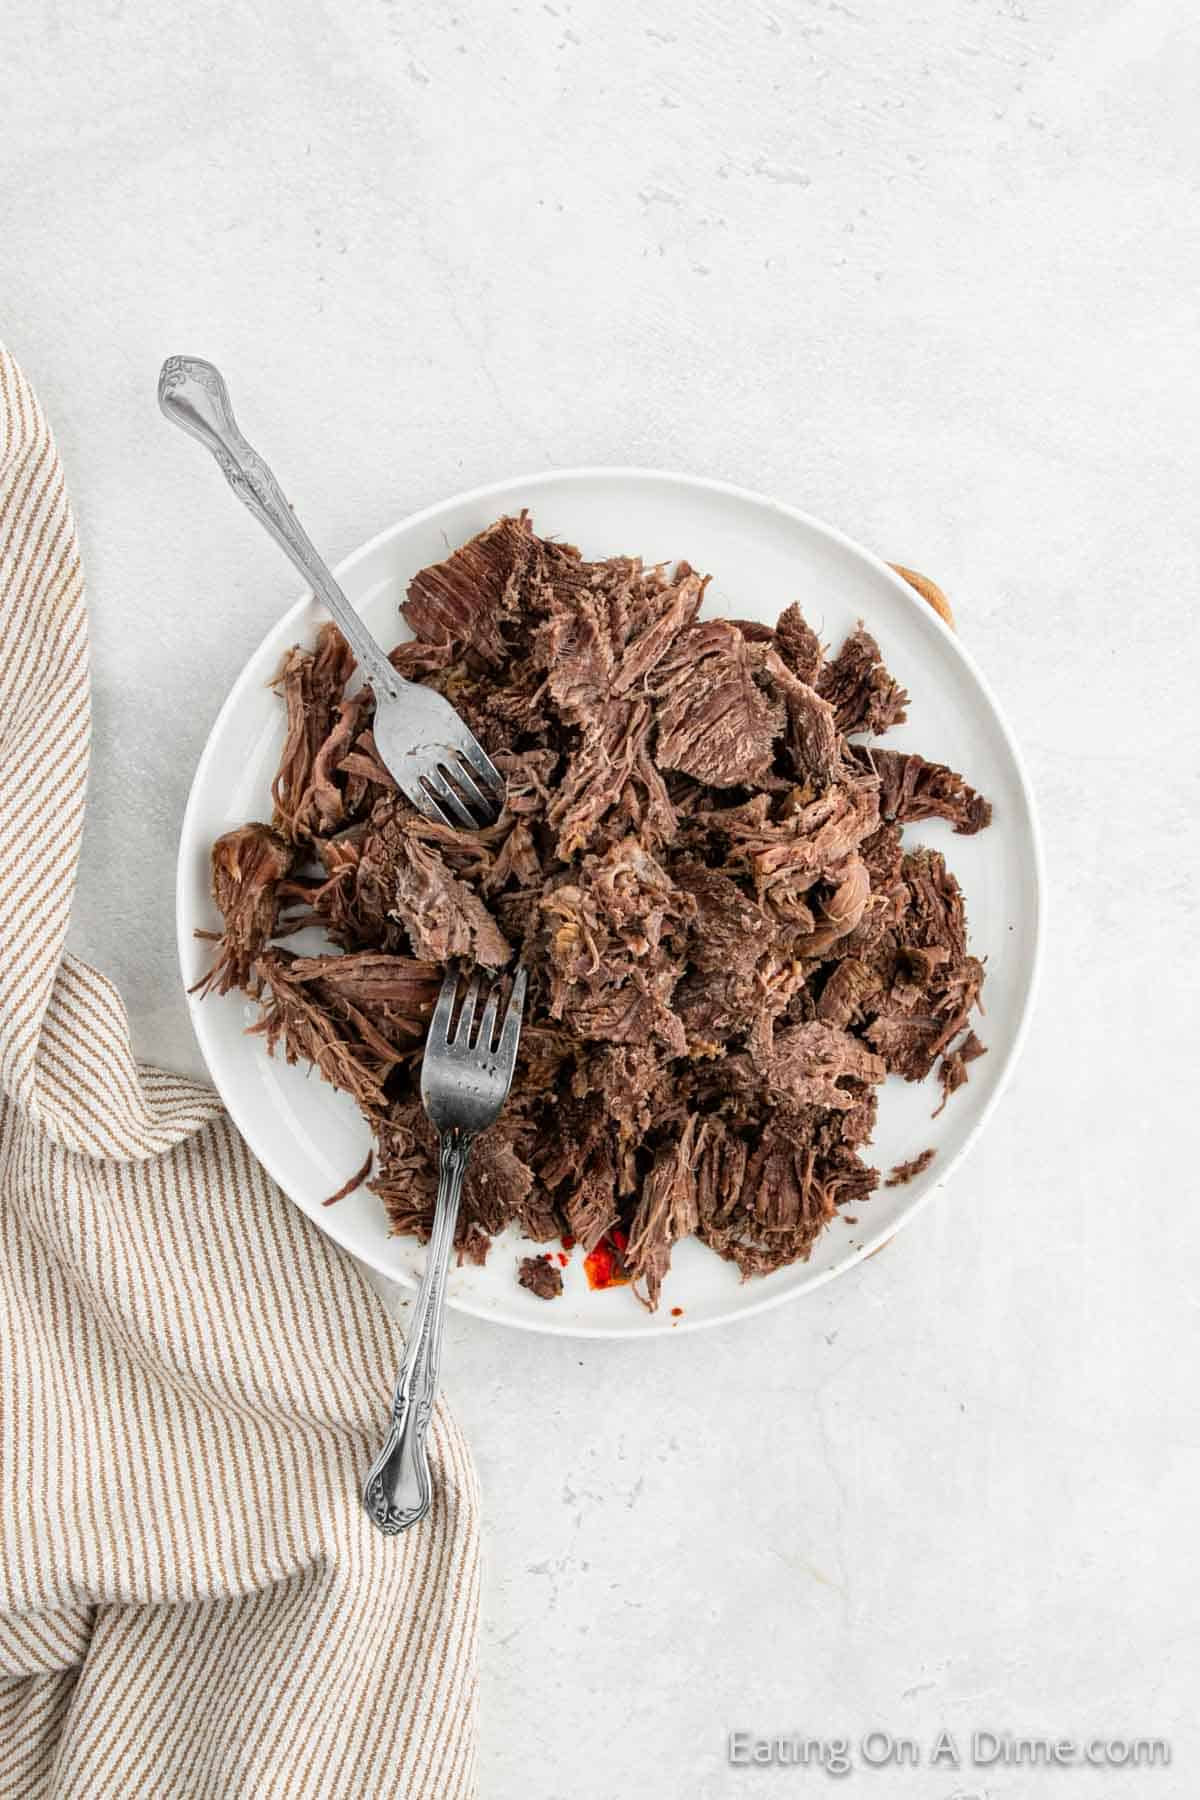 Shredded beef on a plate with two folks